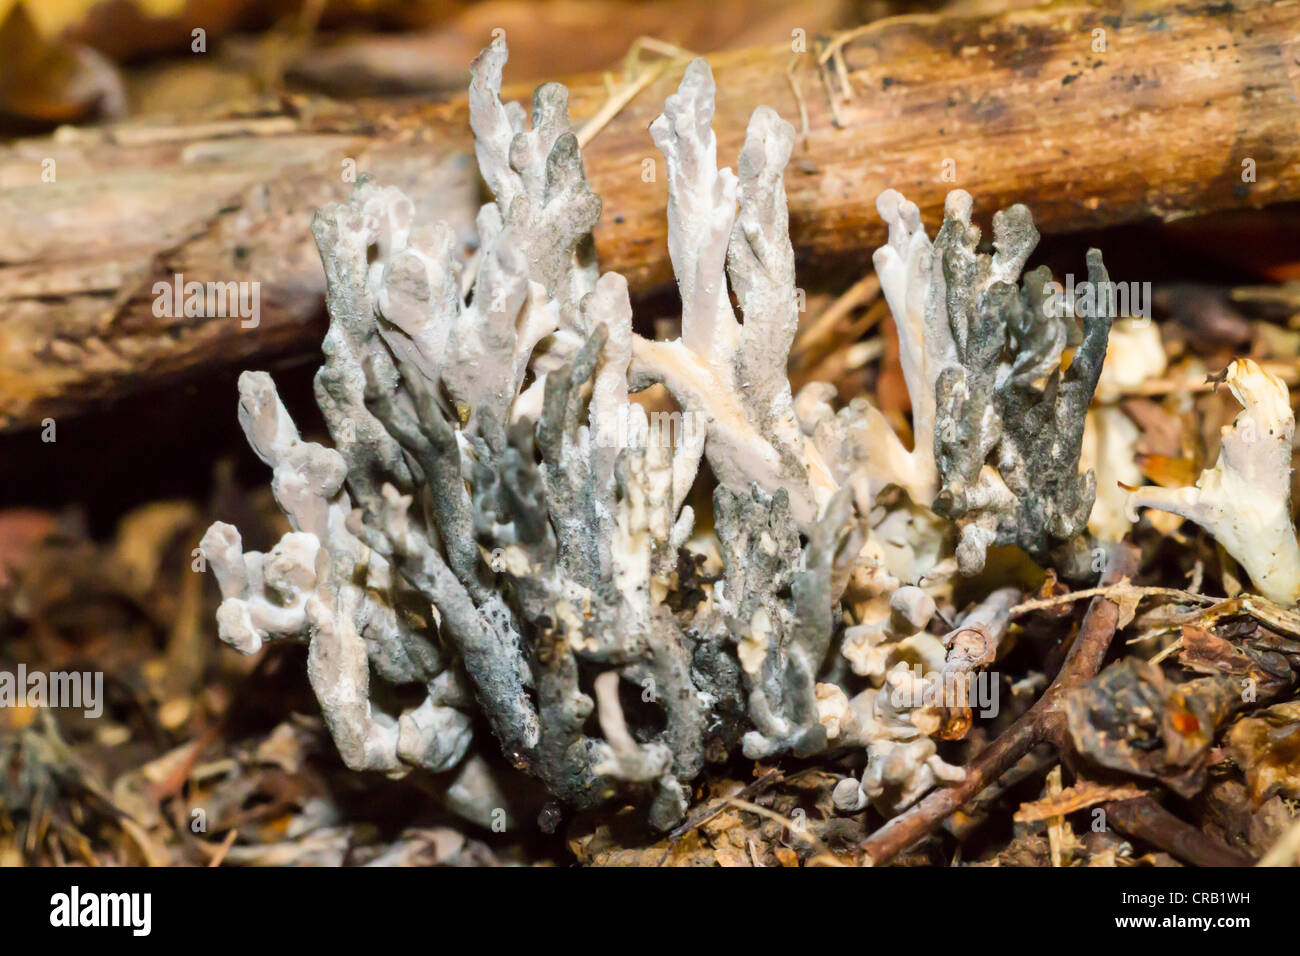 White coral mushrooms grow up through dead leaves and moss in English woodland Stock Photo